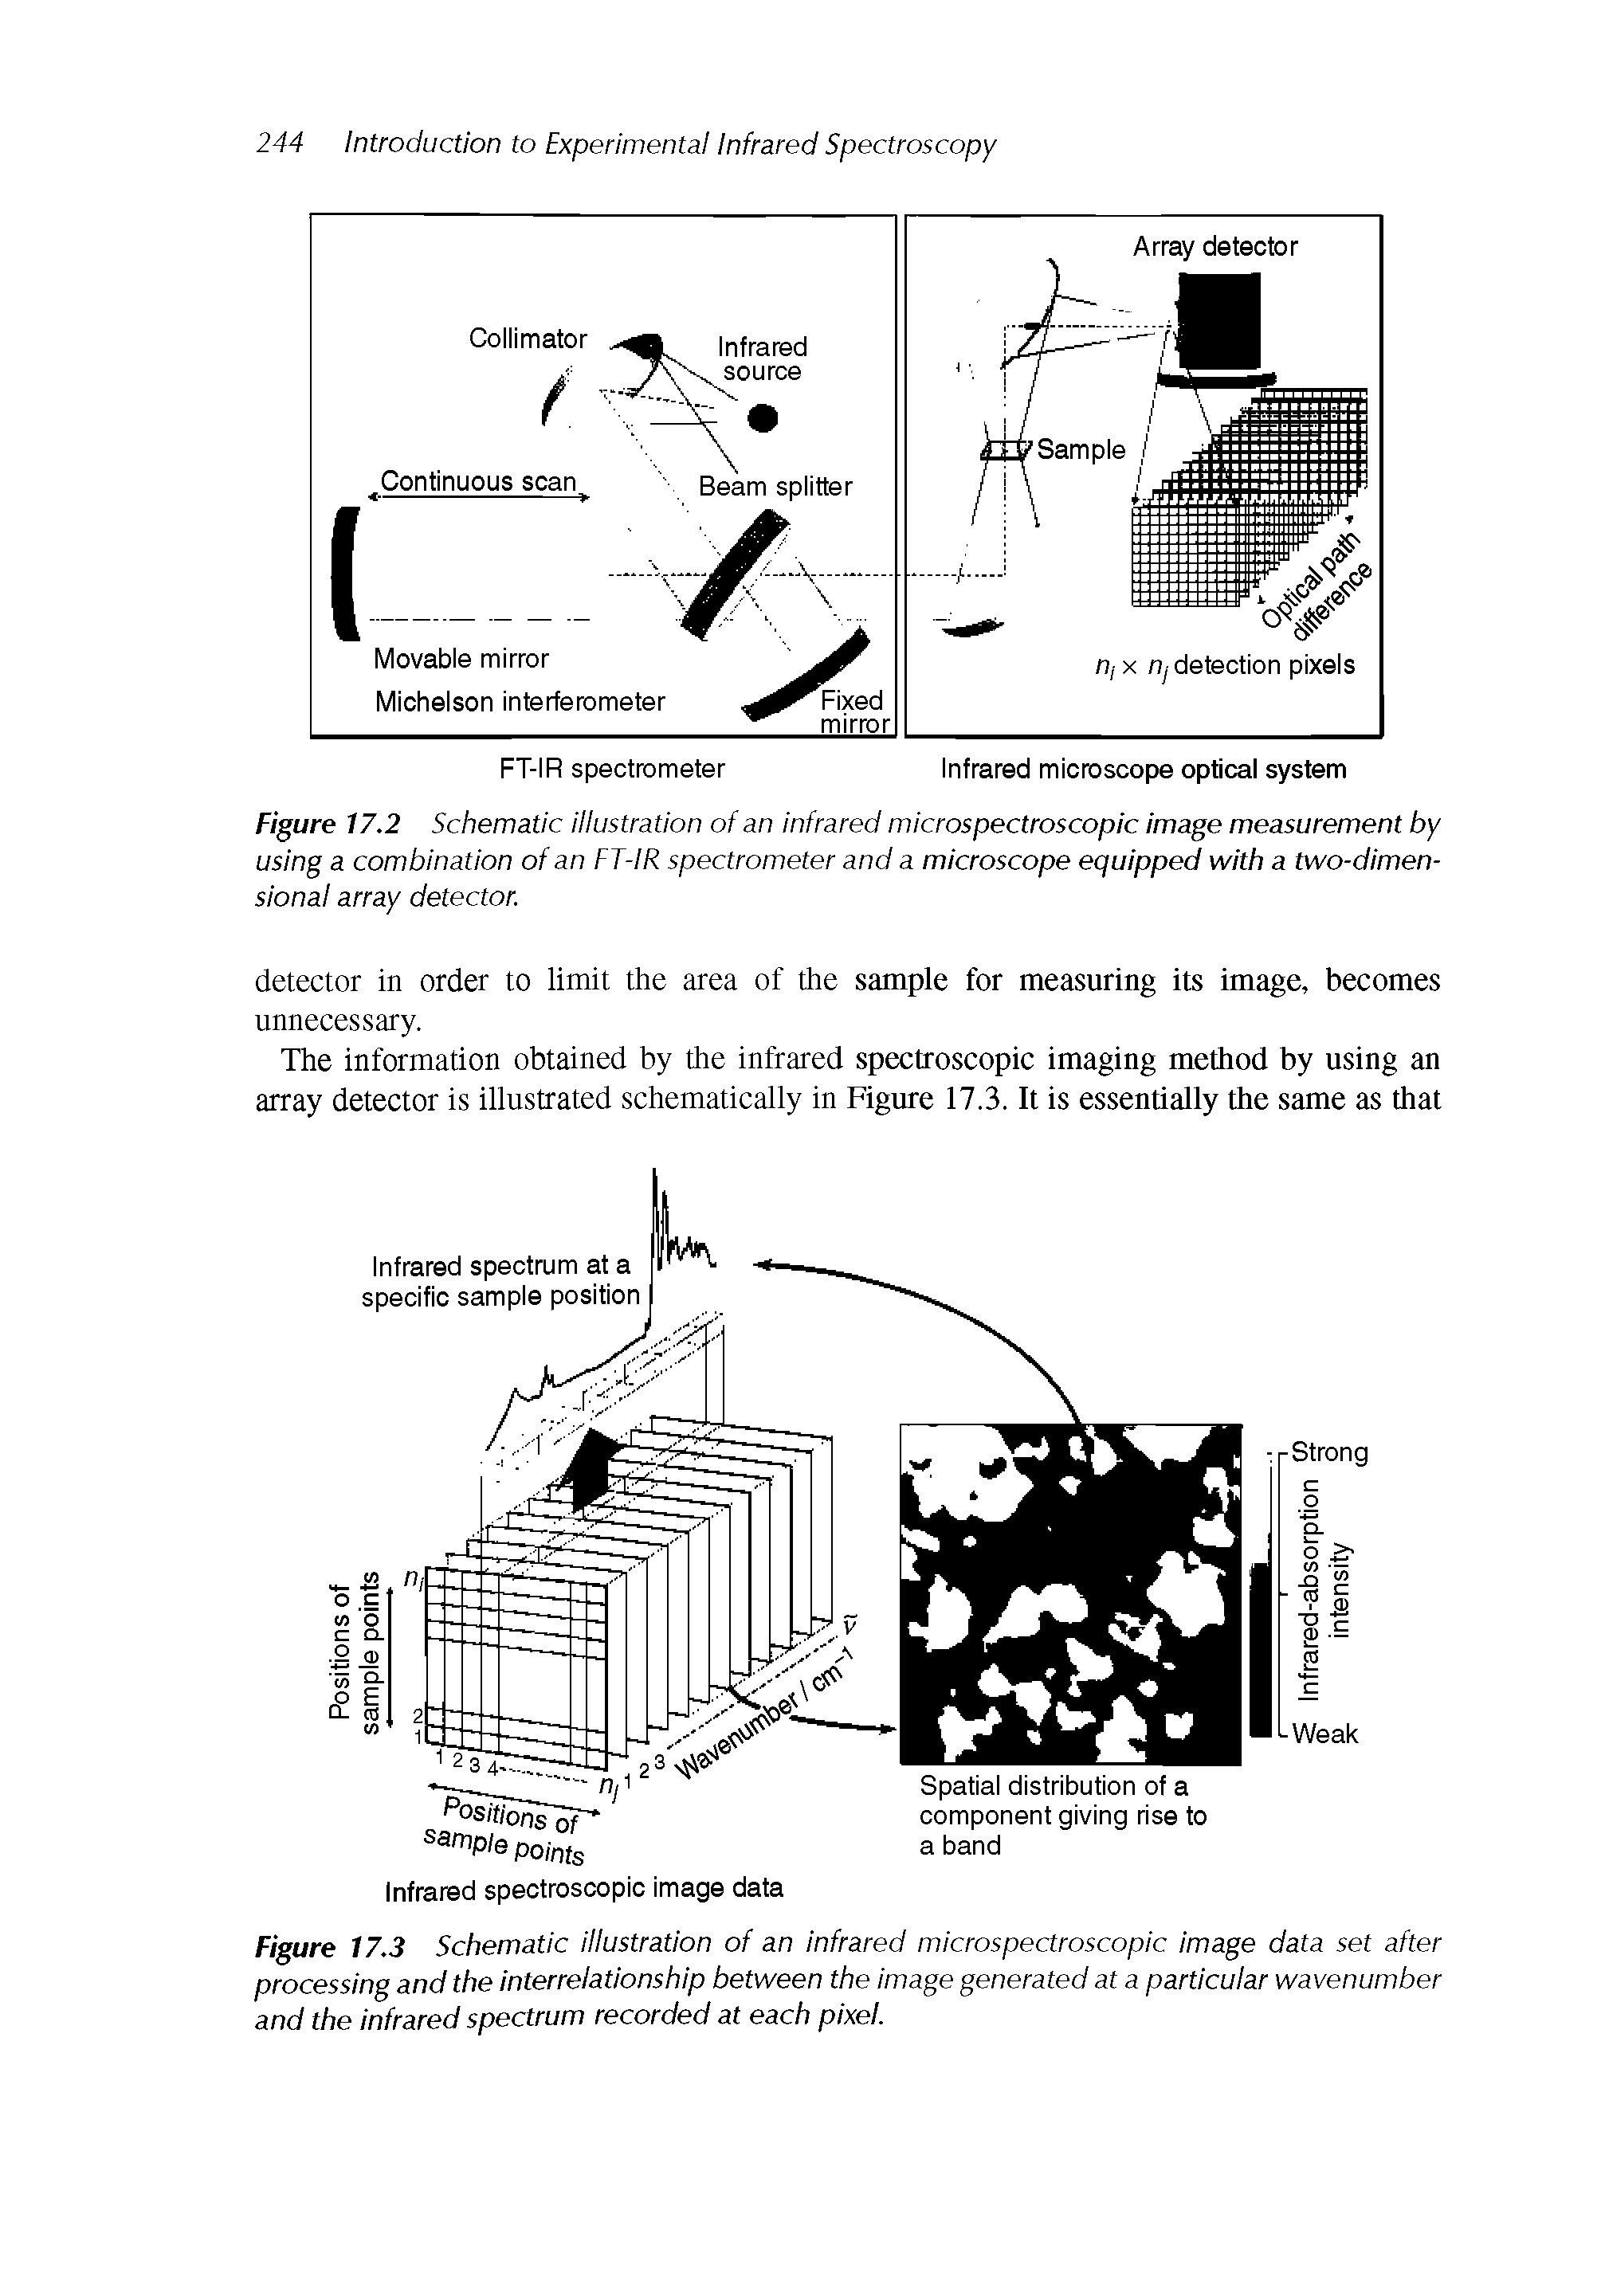 Figure 17.3 Schematic illustration of an infrared microspectroscopic image data set after processing and the interrelationship between the image generated at a particular wavenumber and the infrared spectrum recorded at each pixel.